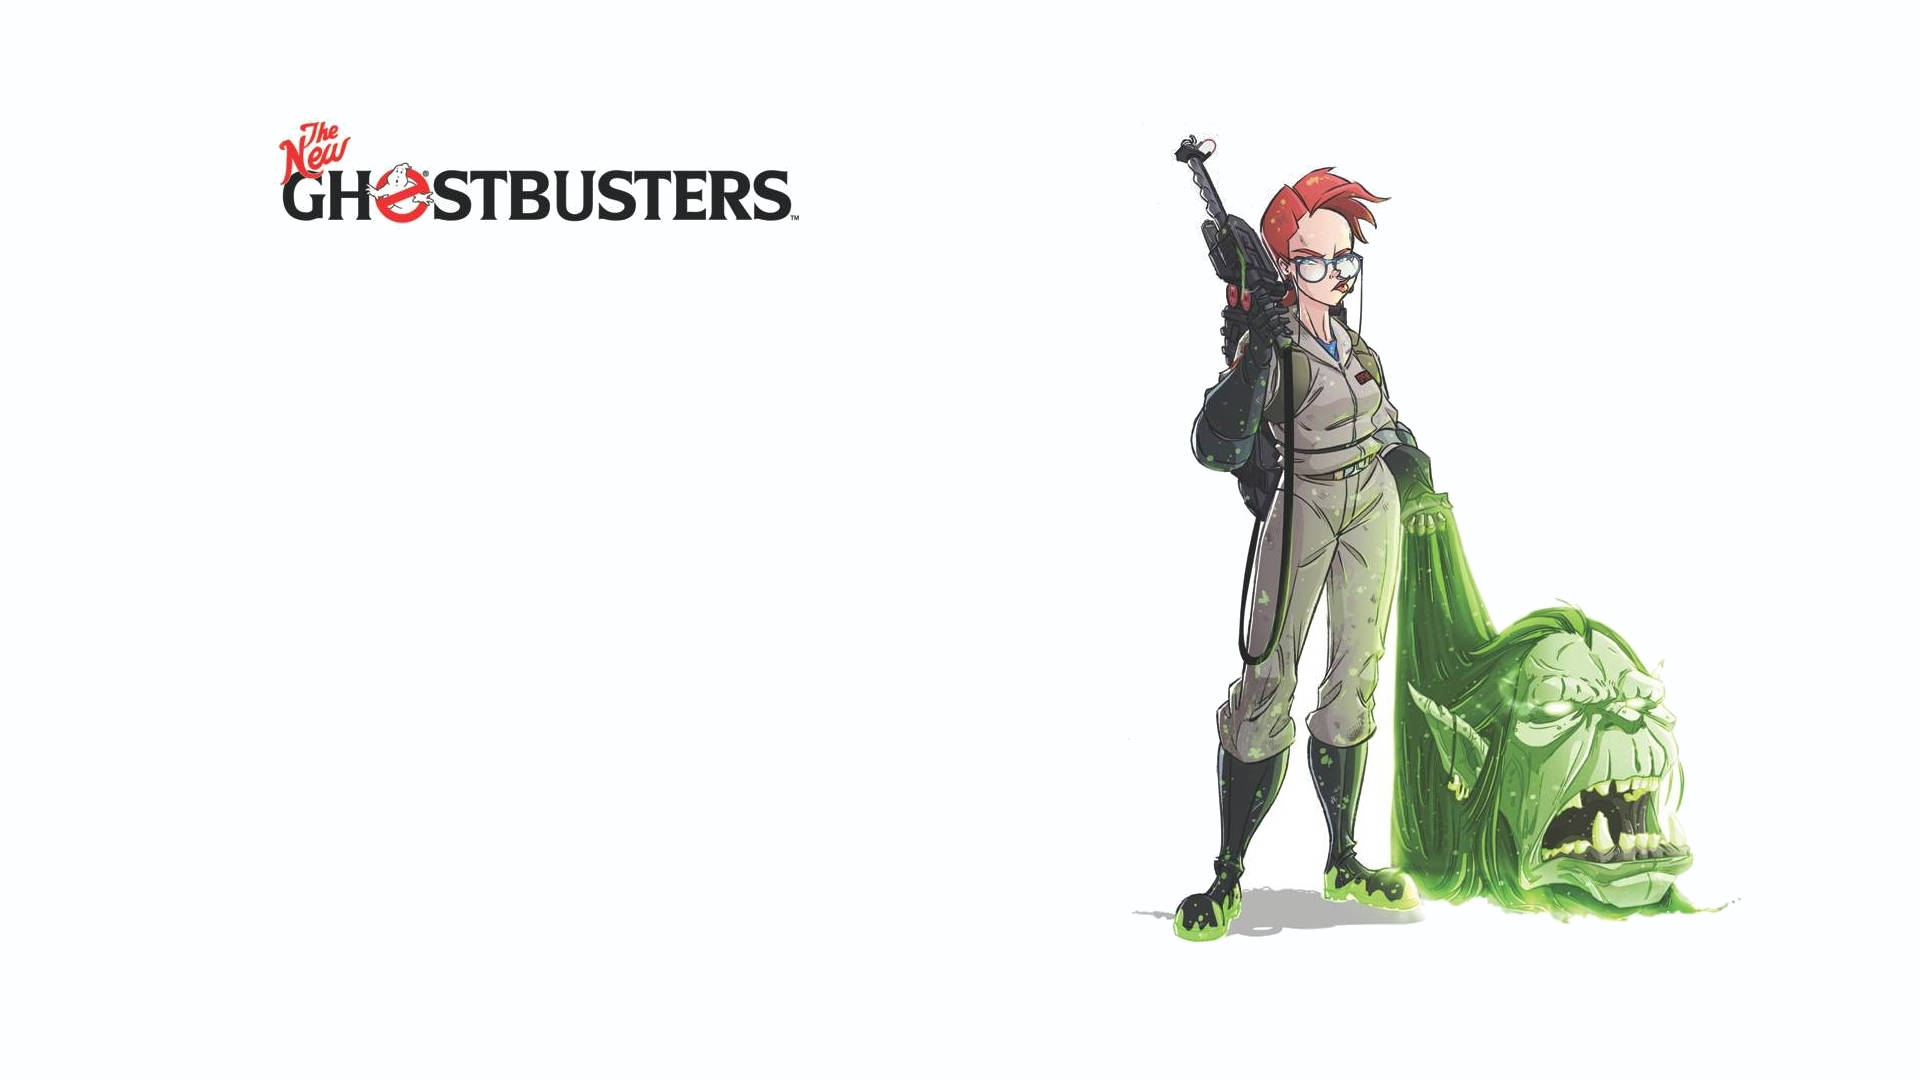 Meet The New Ghostbusters - Ready To Take On Supernatural Feats!